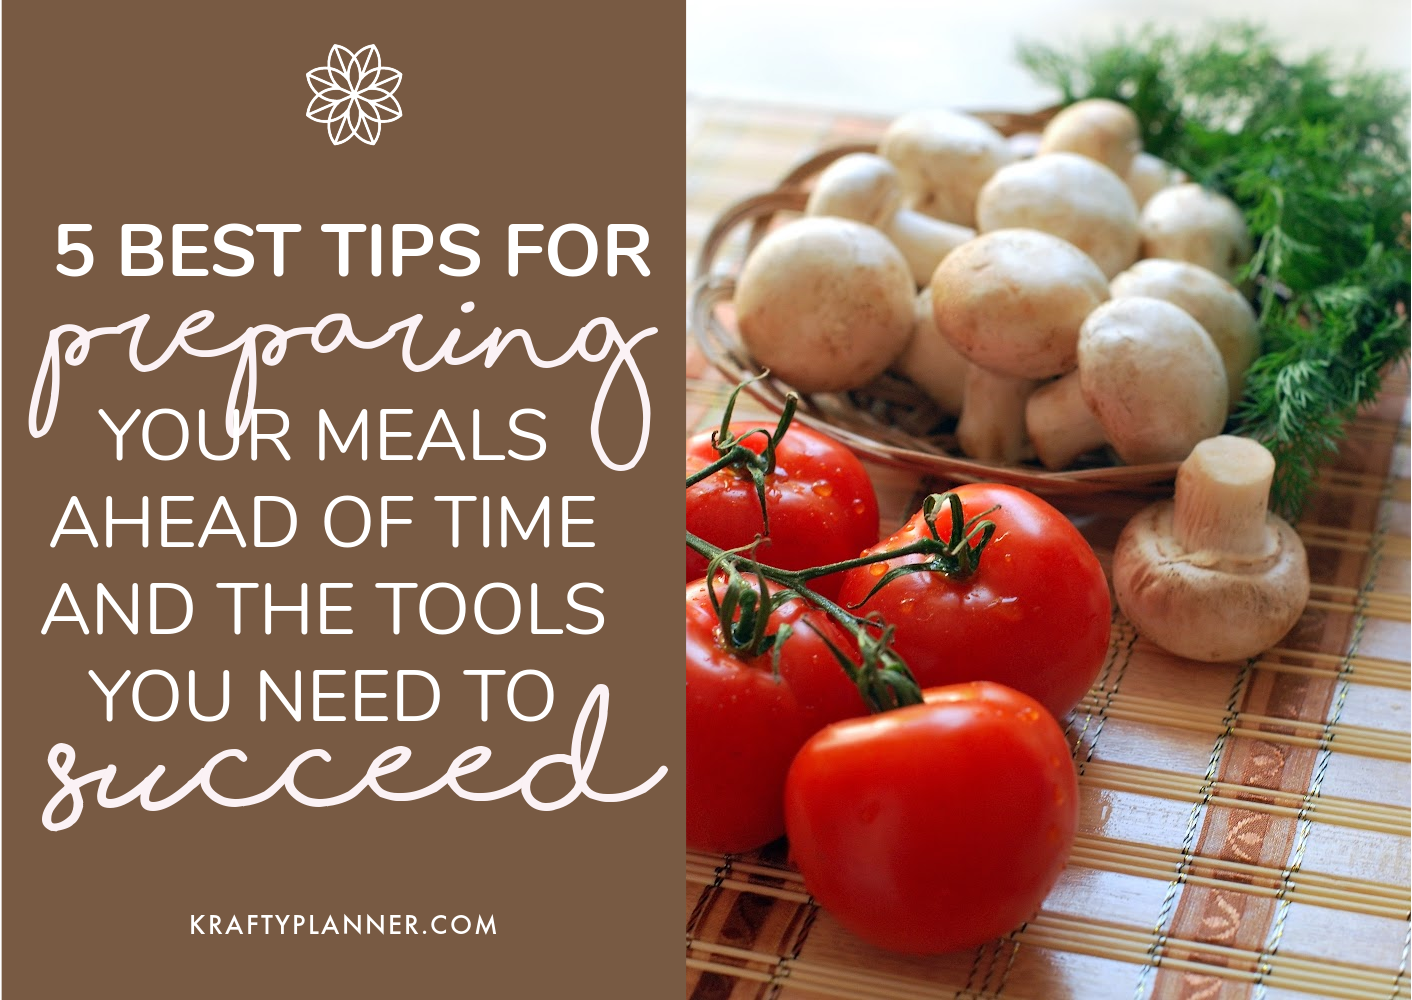 5 Best Tips for Preparing Your Meals Ahead of Time and the Tools You Need to succeed